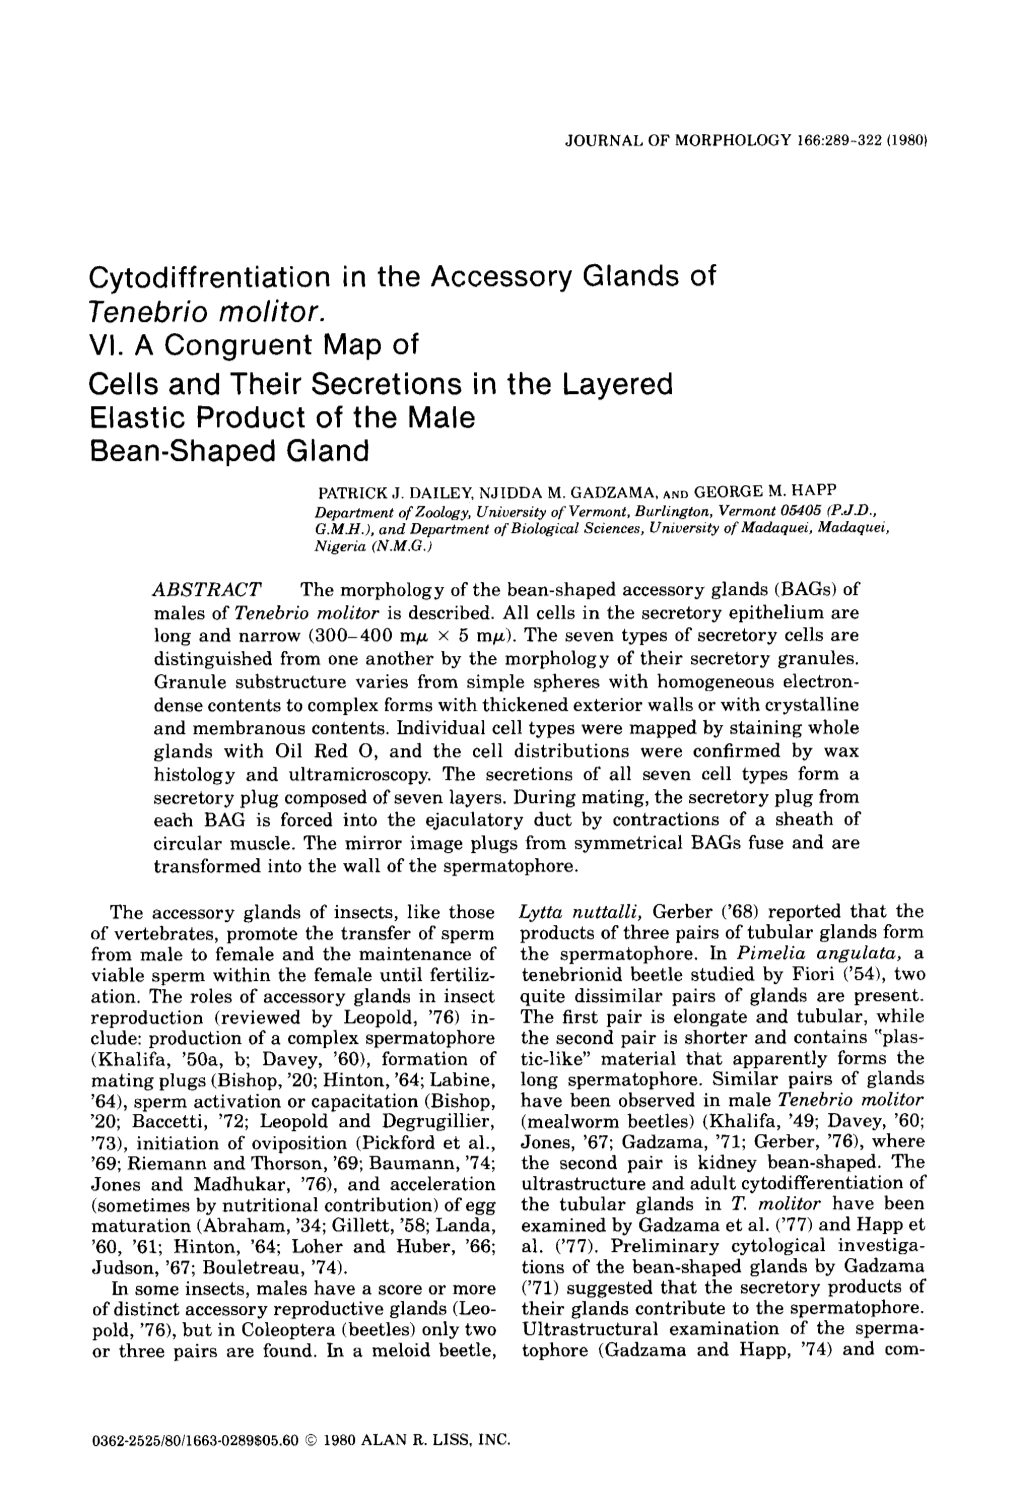 Cytodifferentiation in the Accessory Gland of Tenebrio Molitor. VI. a Congruent Map of Cells and Their